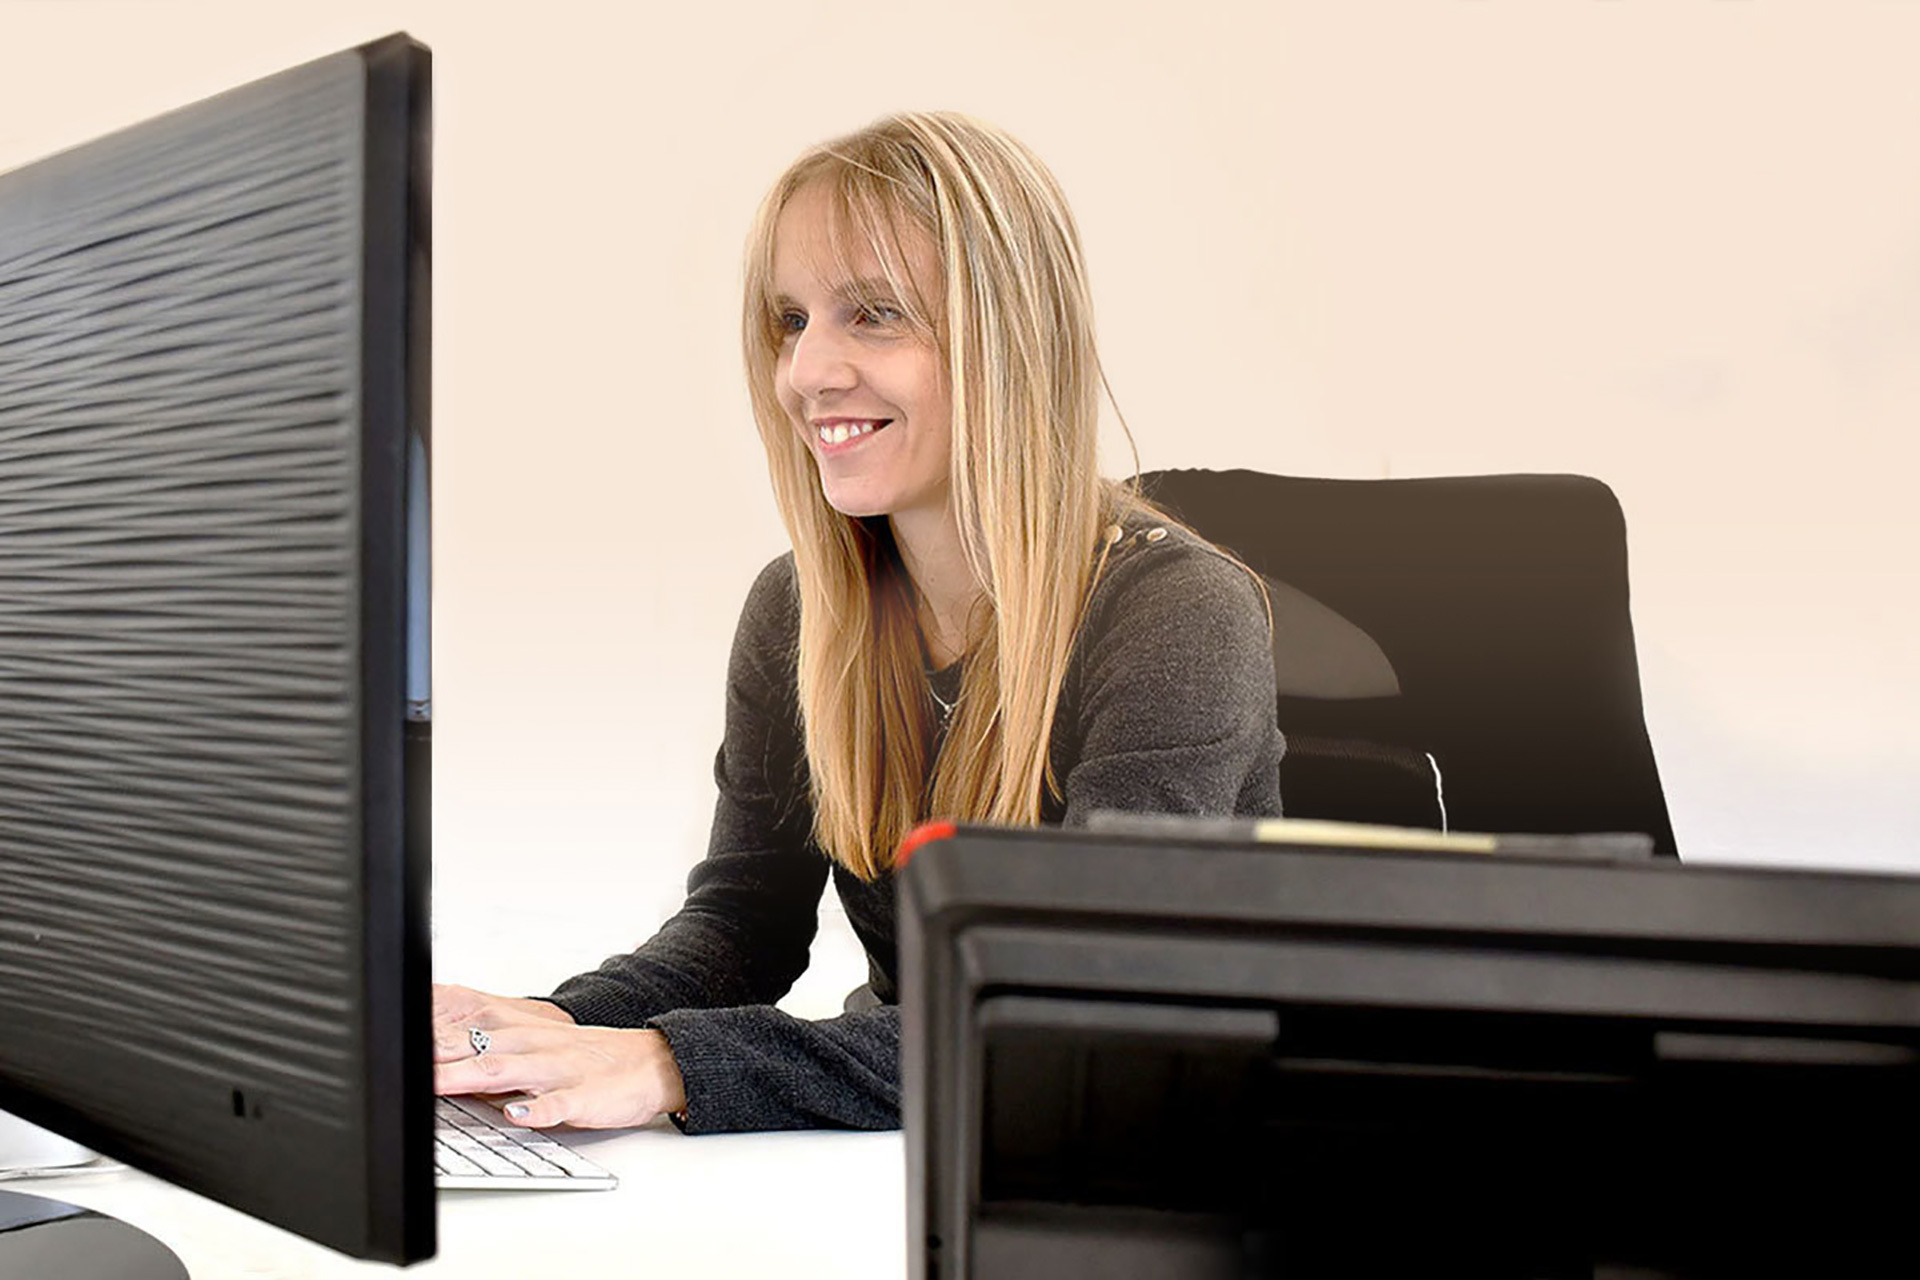 A smiling woman working on her desktop computer